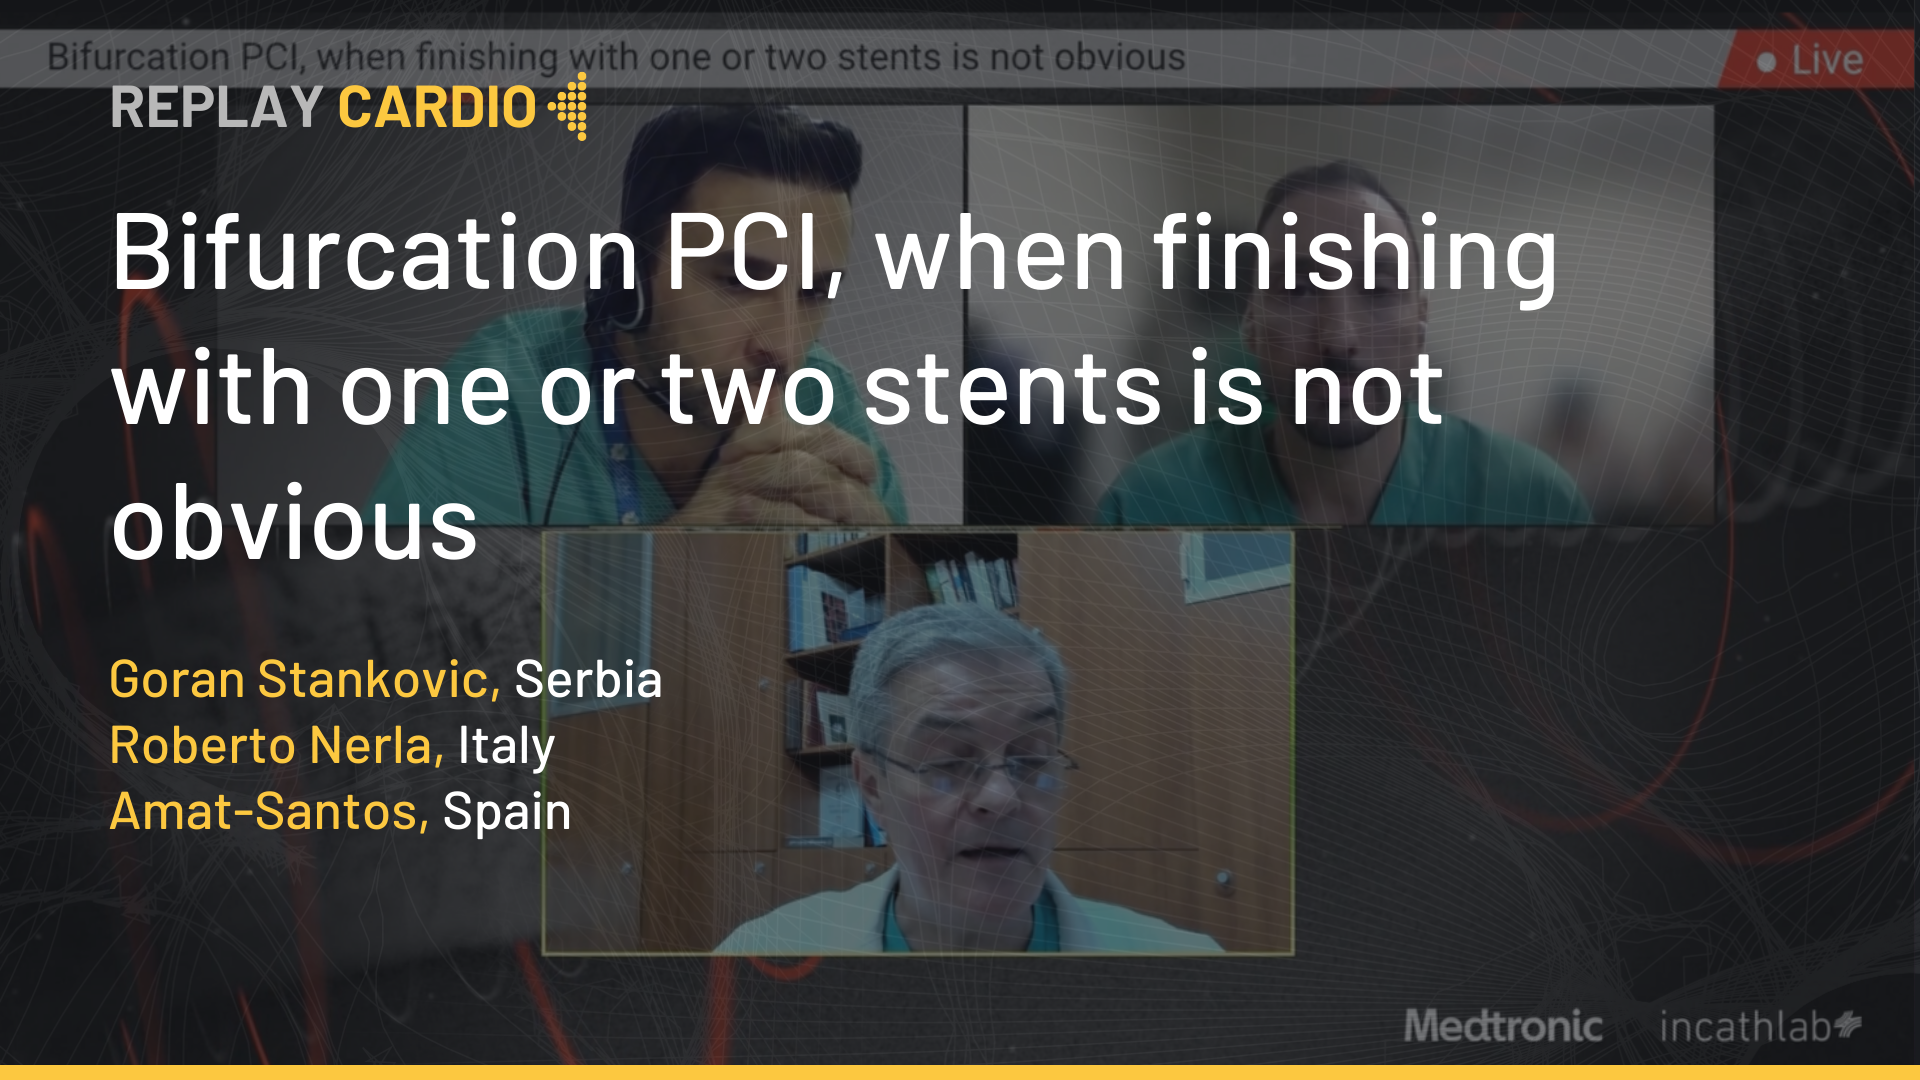 Bifurcation PCI, when finishing with one or two stents is not obvious